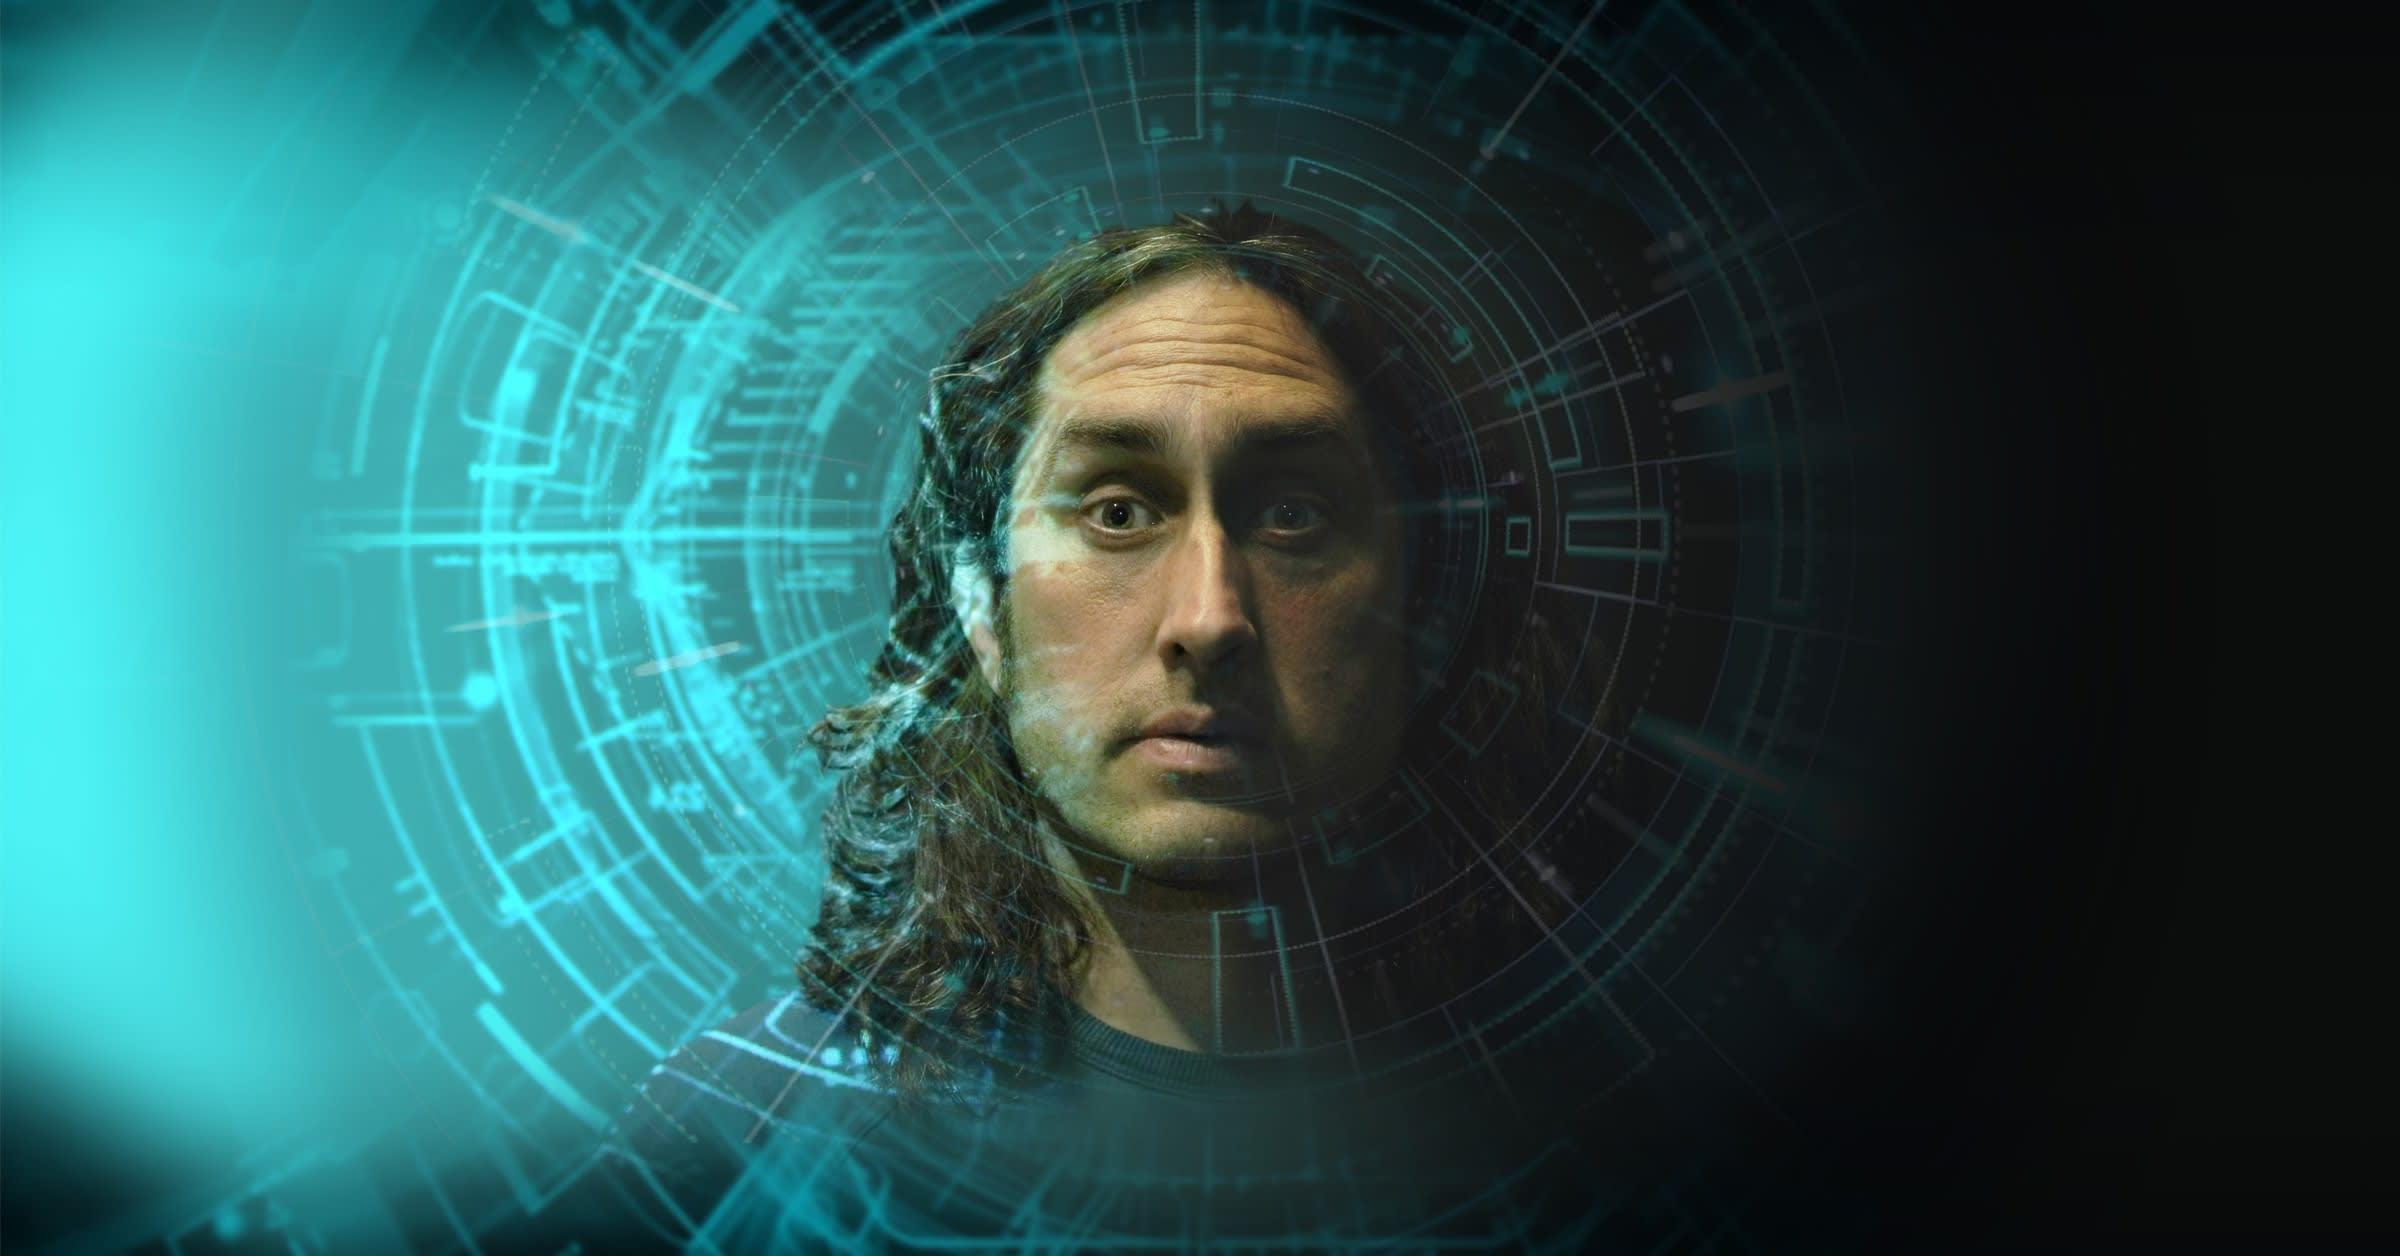 Ross Noble Live on Tour with 'Humournoid'